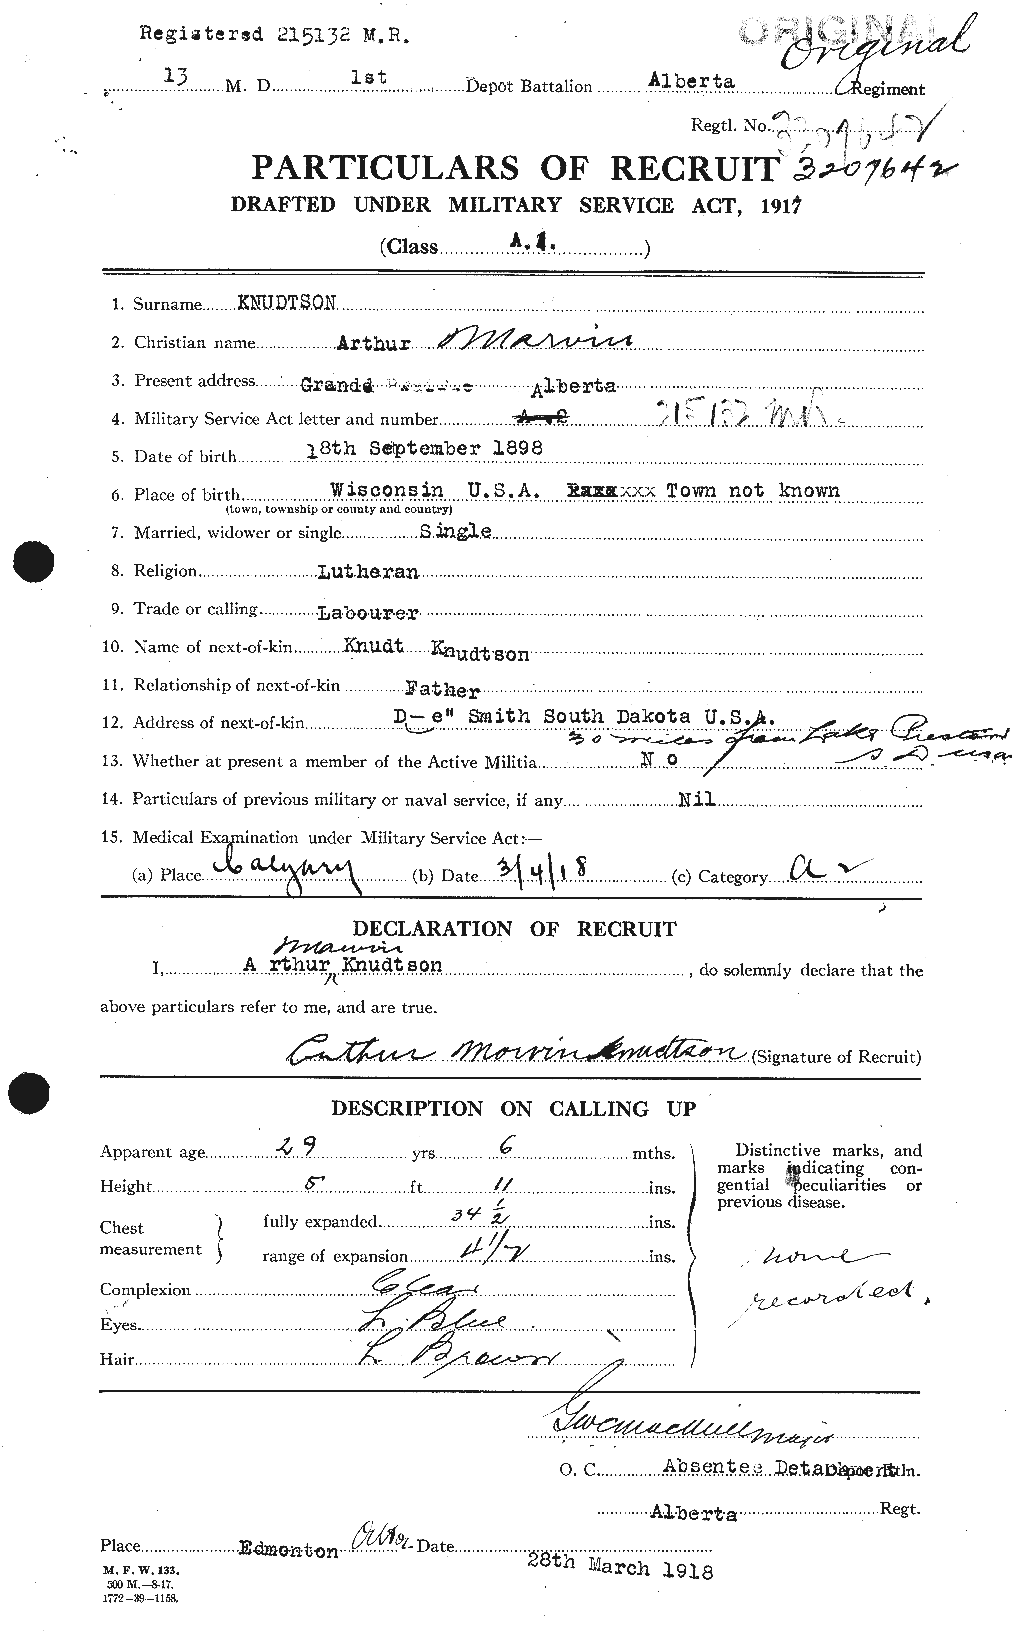 Personnel Records of the First World War - CEF 438030a